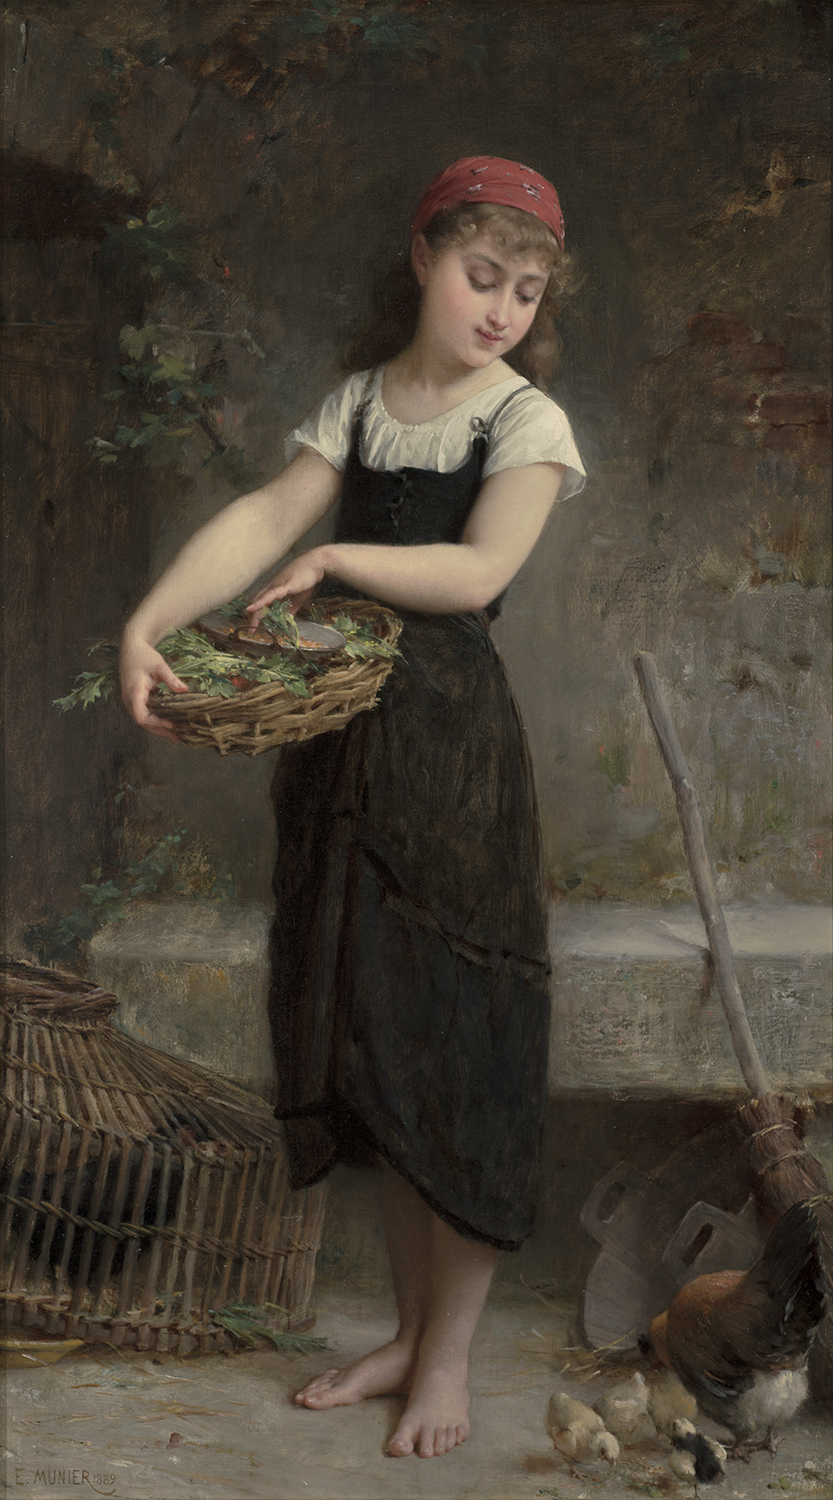 A young girl with a basket in her hand feeding baby chickens - Feeding the Chicks - Emile Munier